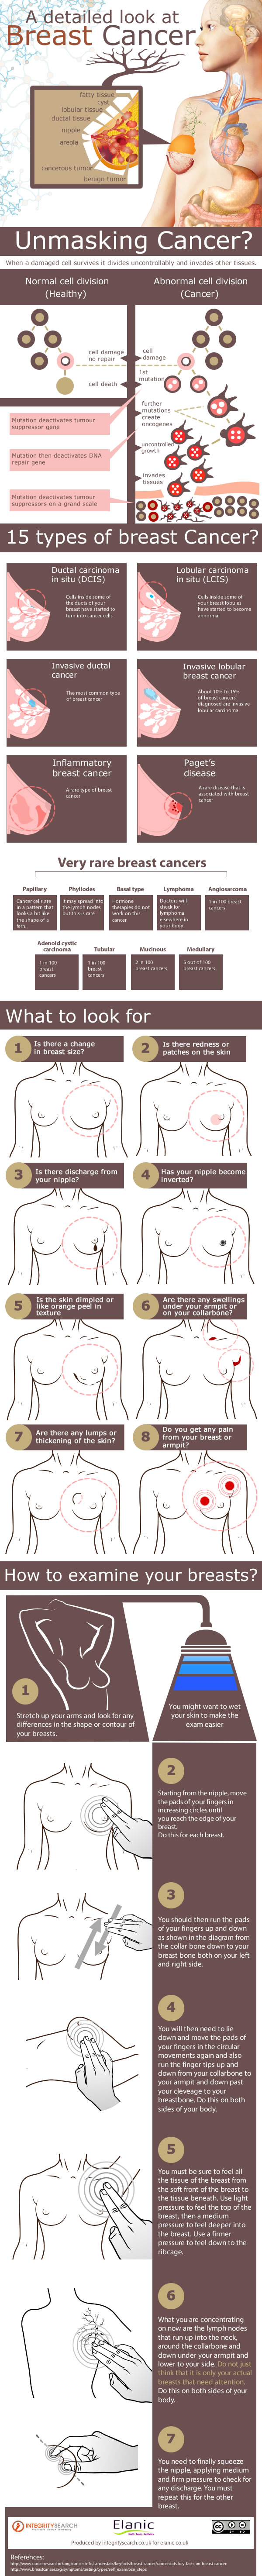 Breast Cancer Infographic